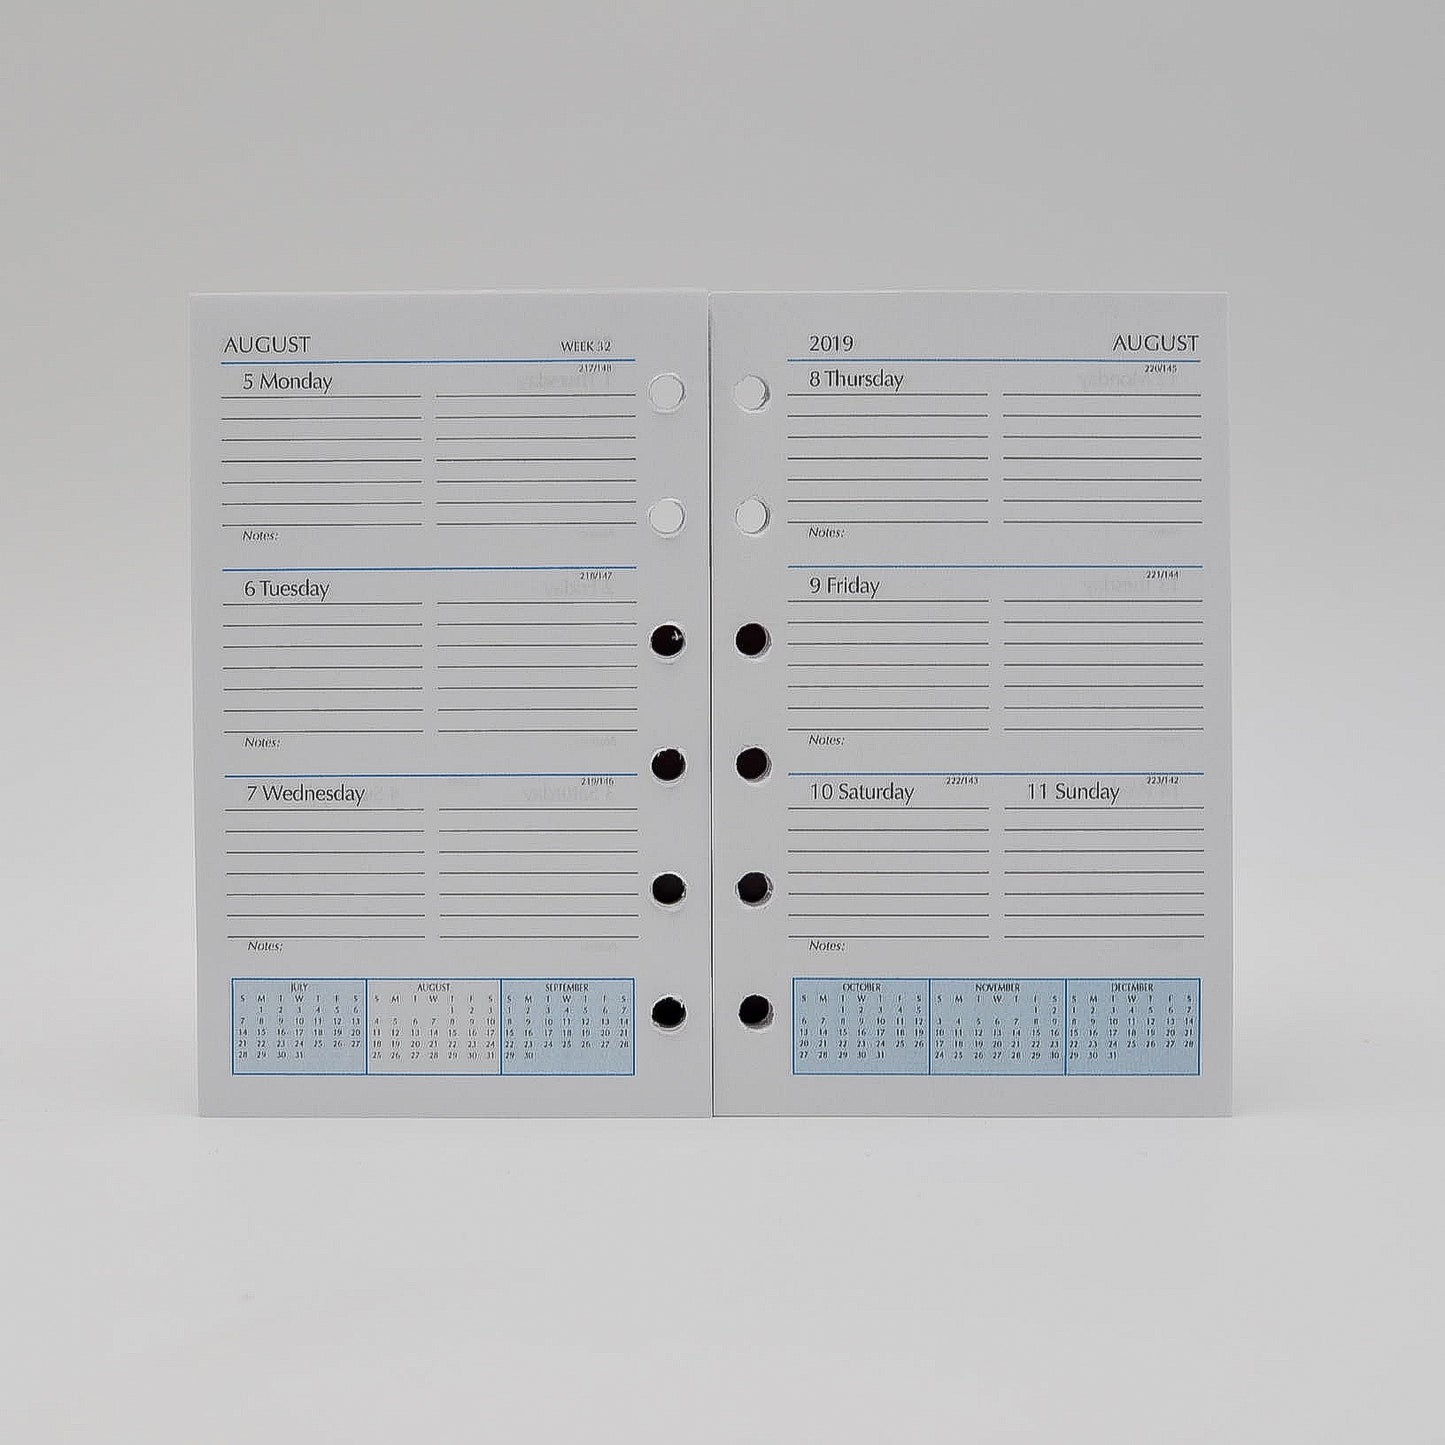 2022 2021 planner McCarthy Collection: MP35P6 5" X 3-1/8" 6-Ring Planner Coach loose leaf calendar refill planner paper 6 hole mccarthy monthly weekly 2019 2020 raika scully preference louis viutton loose leaf paper insert david king planning diary 6 hole 